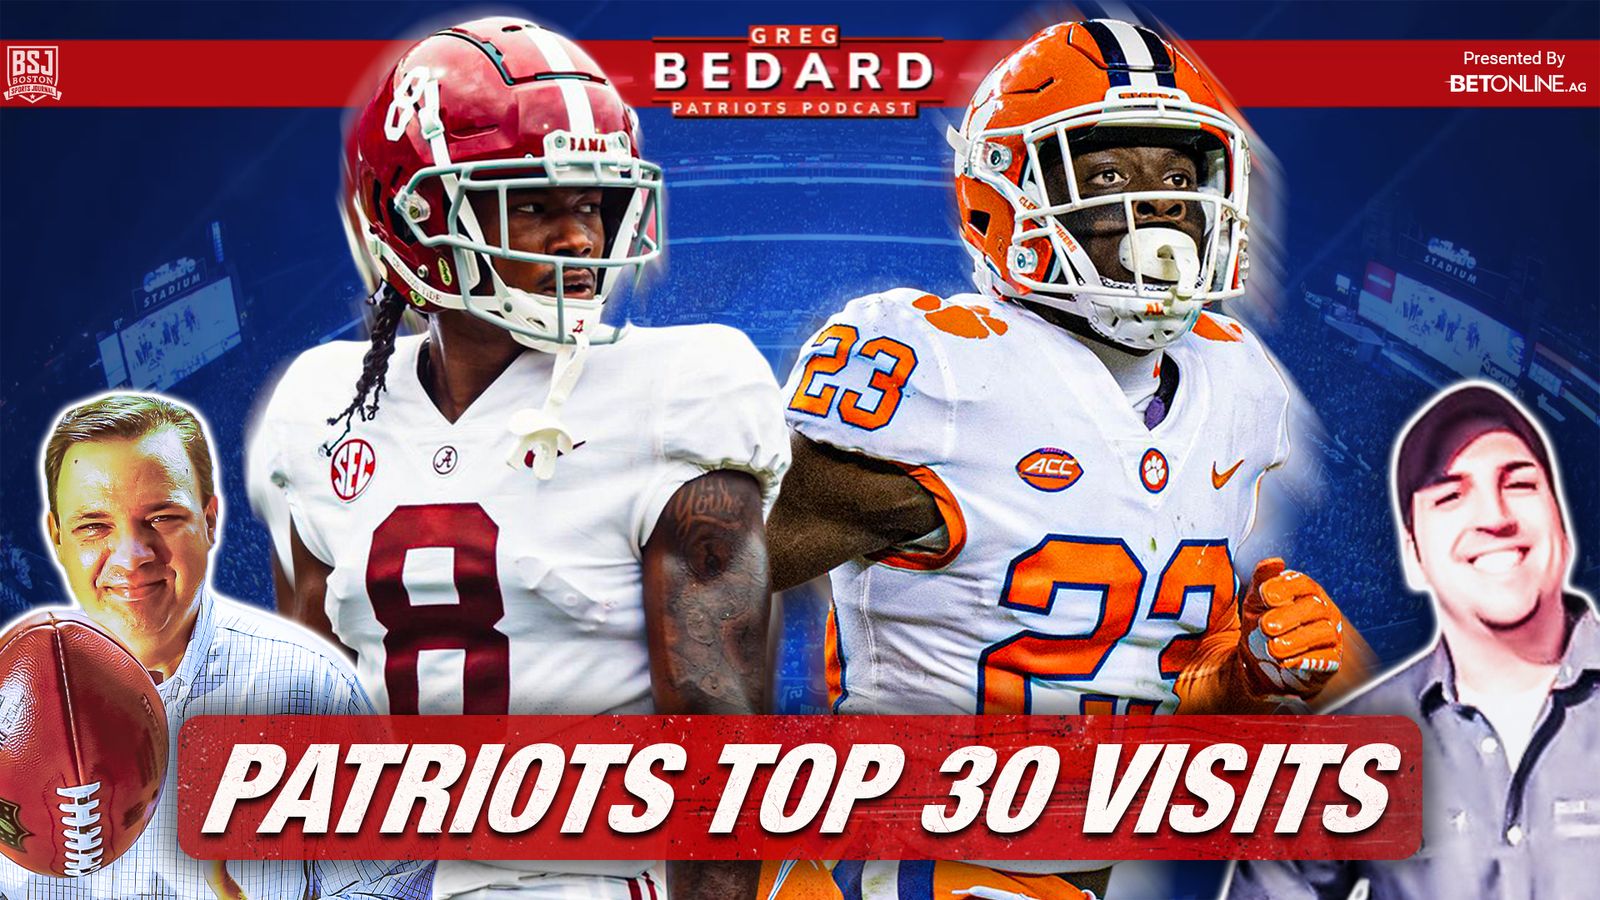 Podcast Bedard Patriots Pod Top 30 visits and the WR